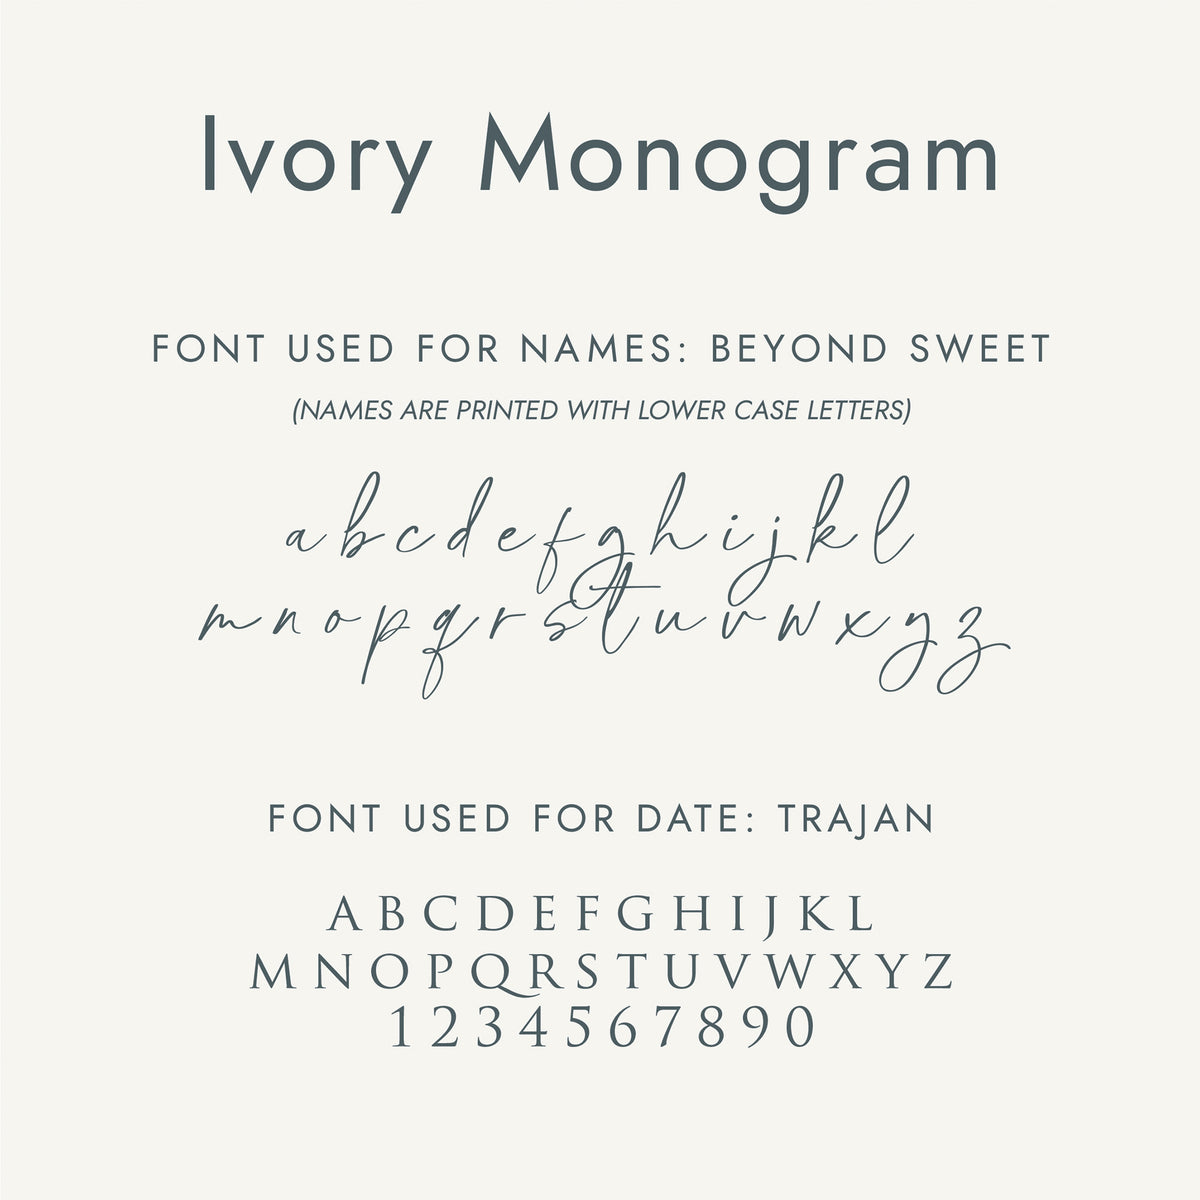 Anniversary Journal | Printed Cover: Ivory Monogram | Available Personalized